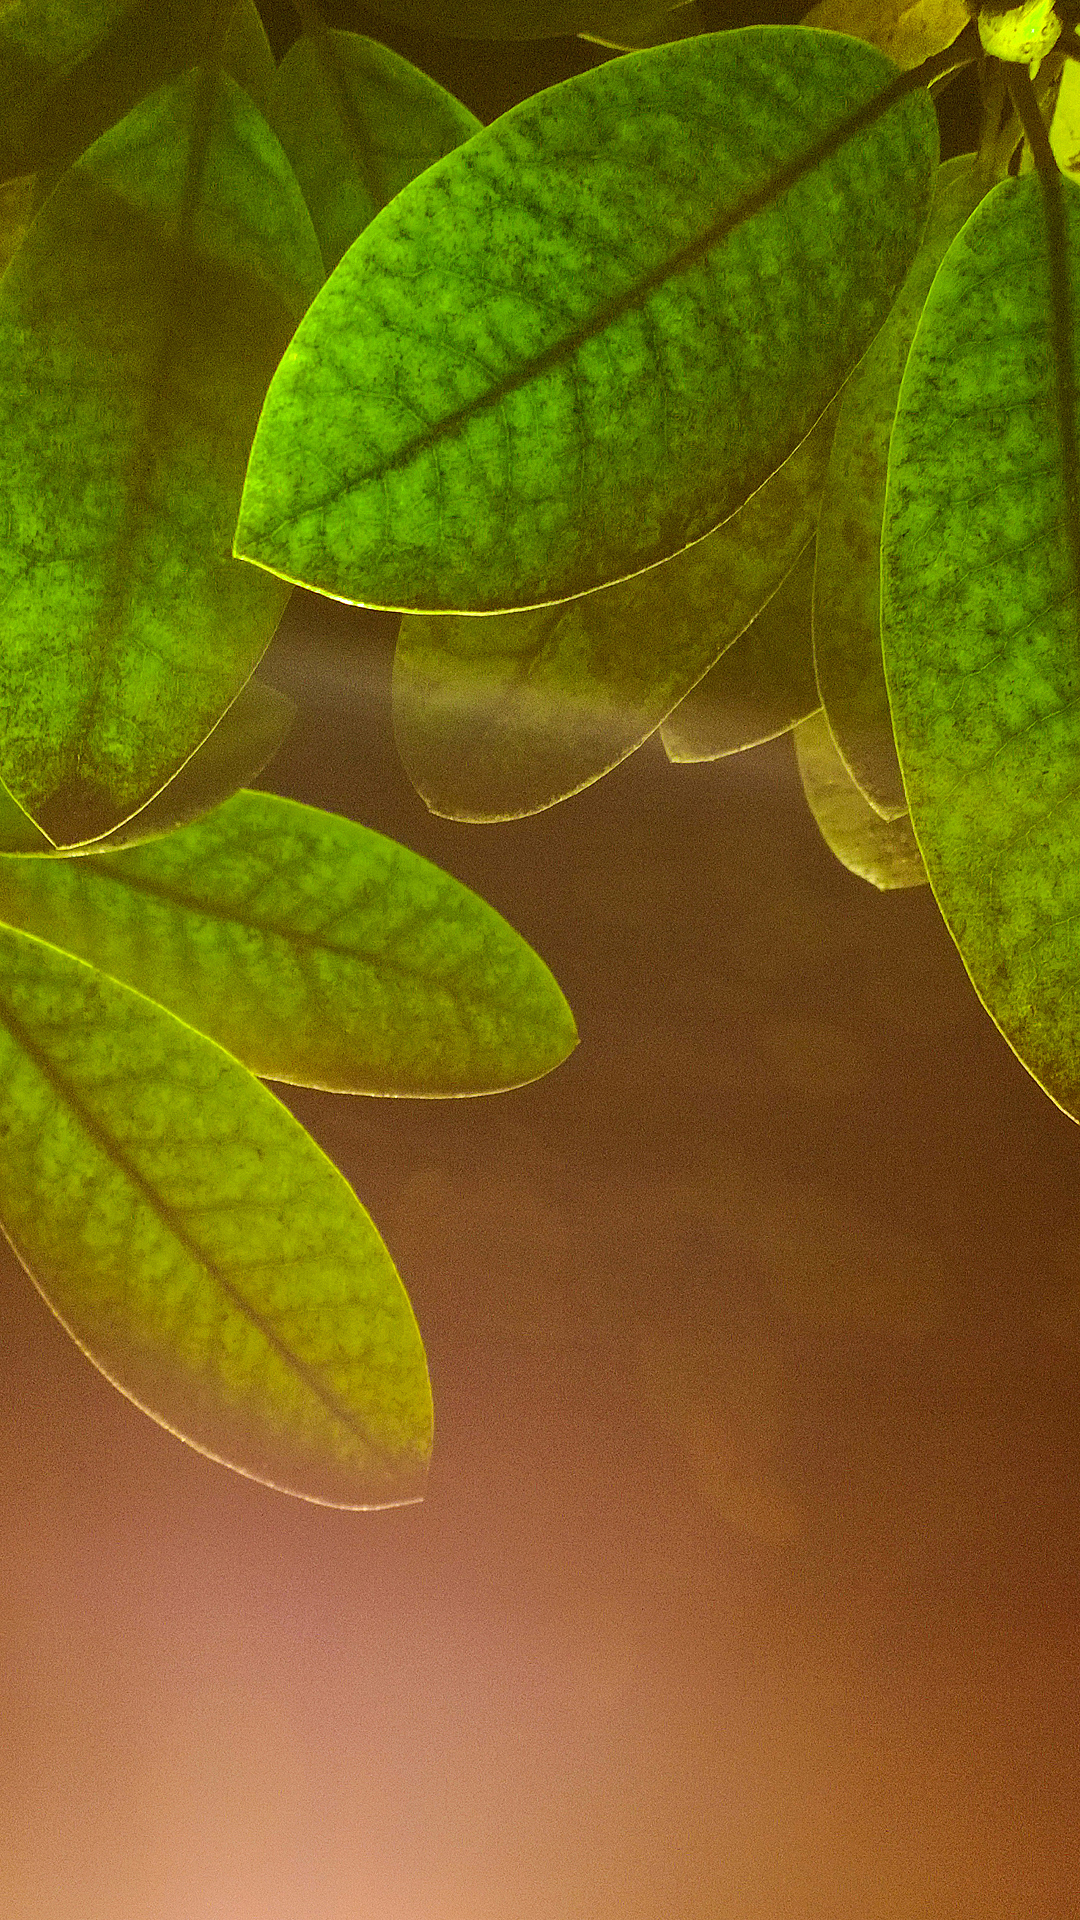 Where To Get Green Leaves In Orange Background Lock Screen Wallpaper